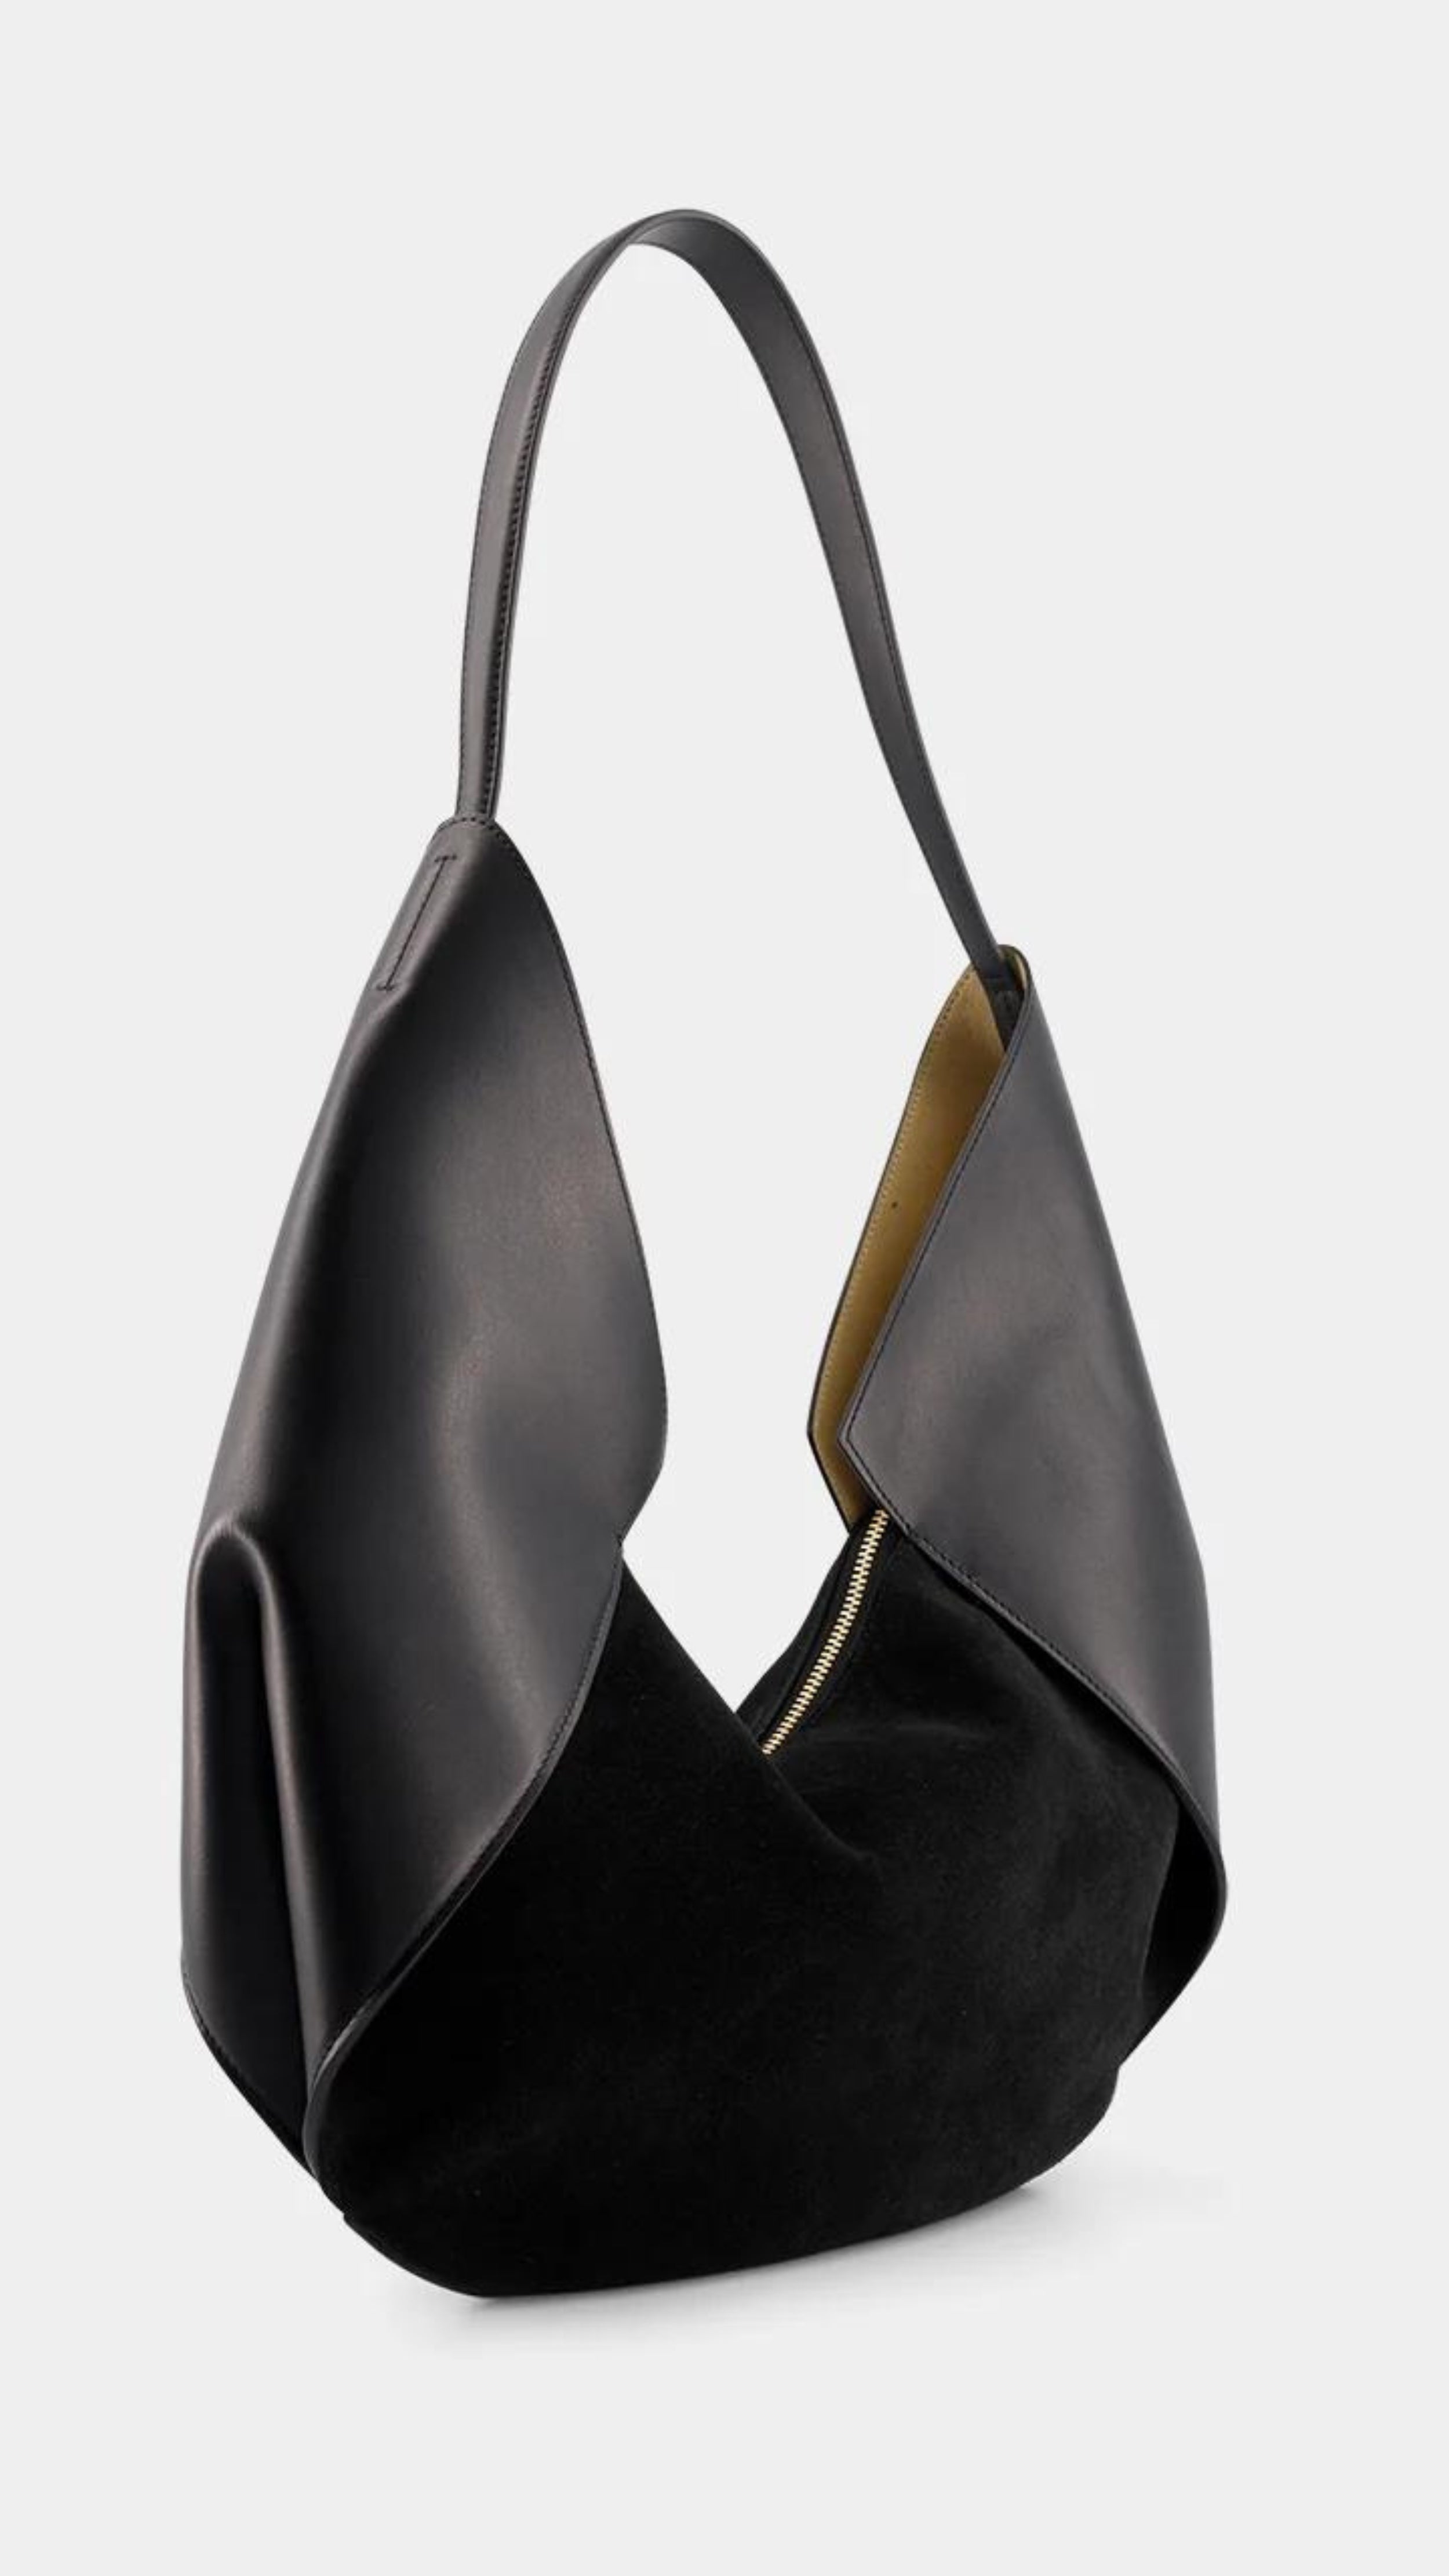 Ree Projects Riva Mini in Soft Calf and Suede in Black. Modern shaped soft black leather and suede purse. Small sized should bag with a zipper closure. Product photo from the front side view.